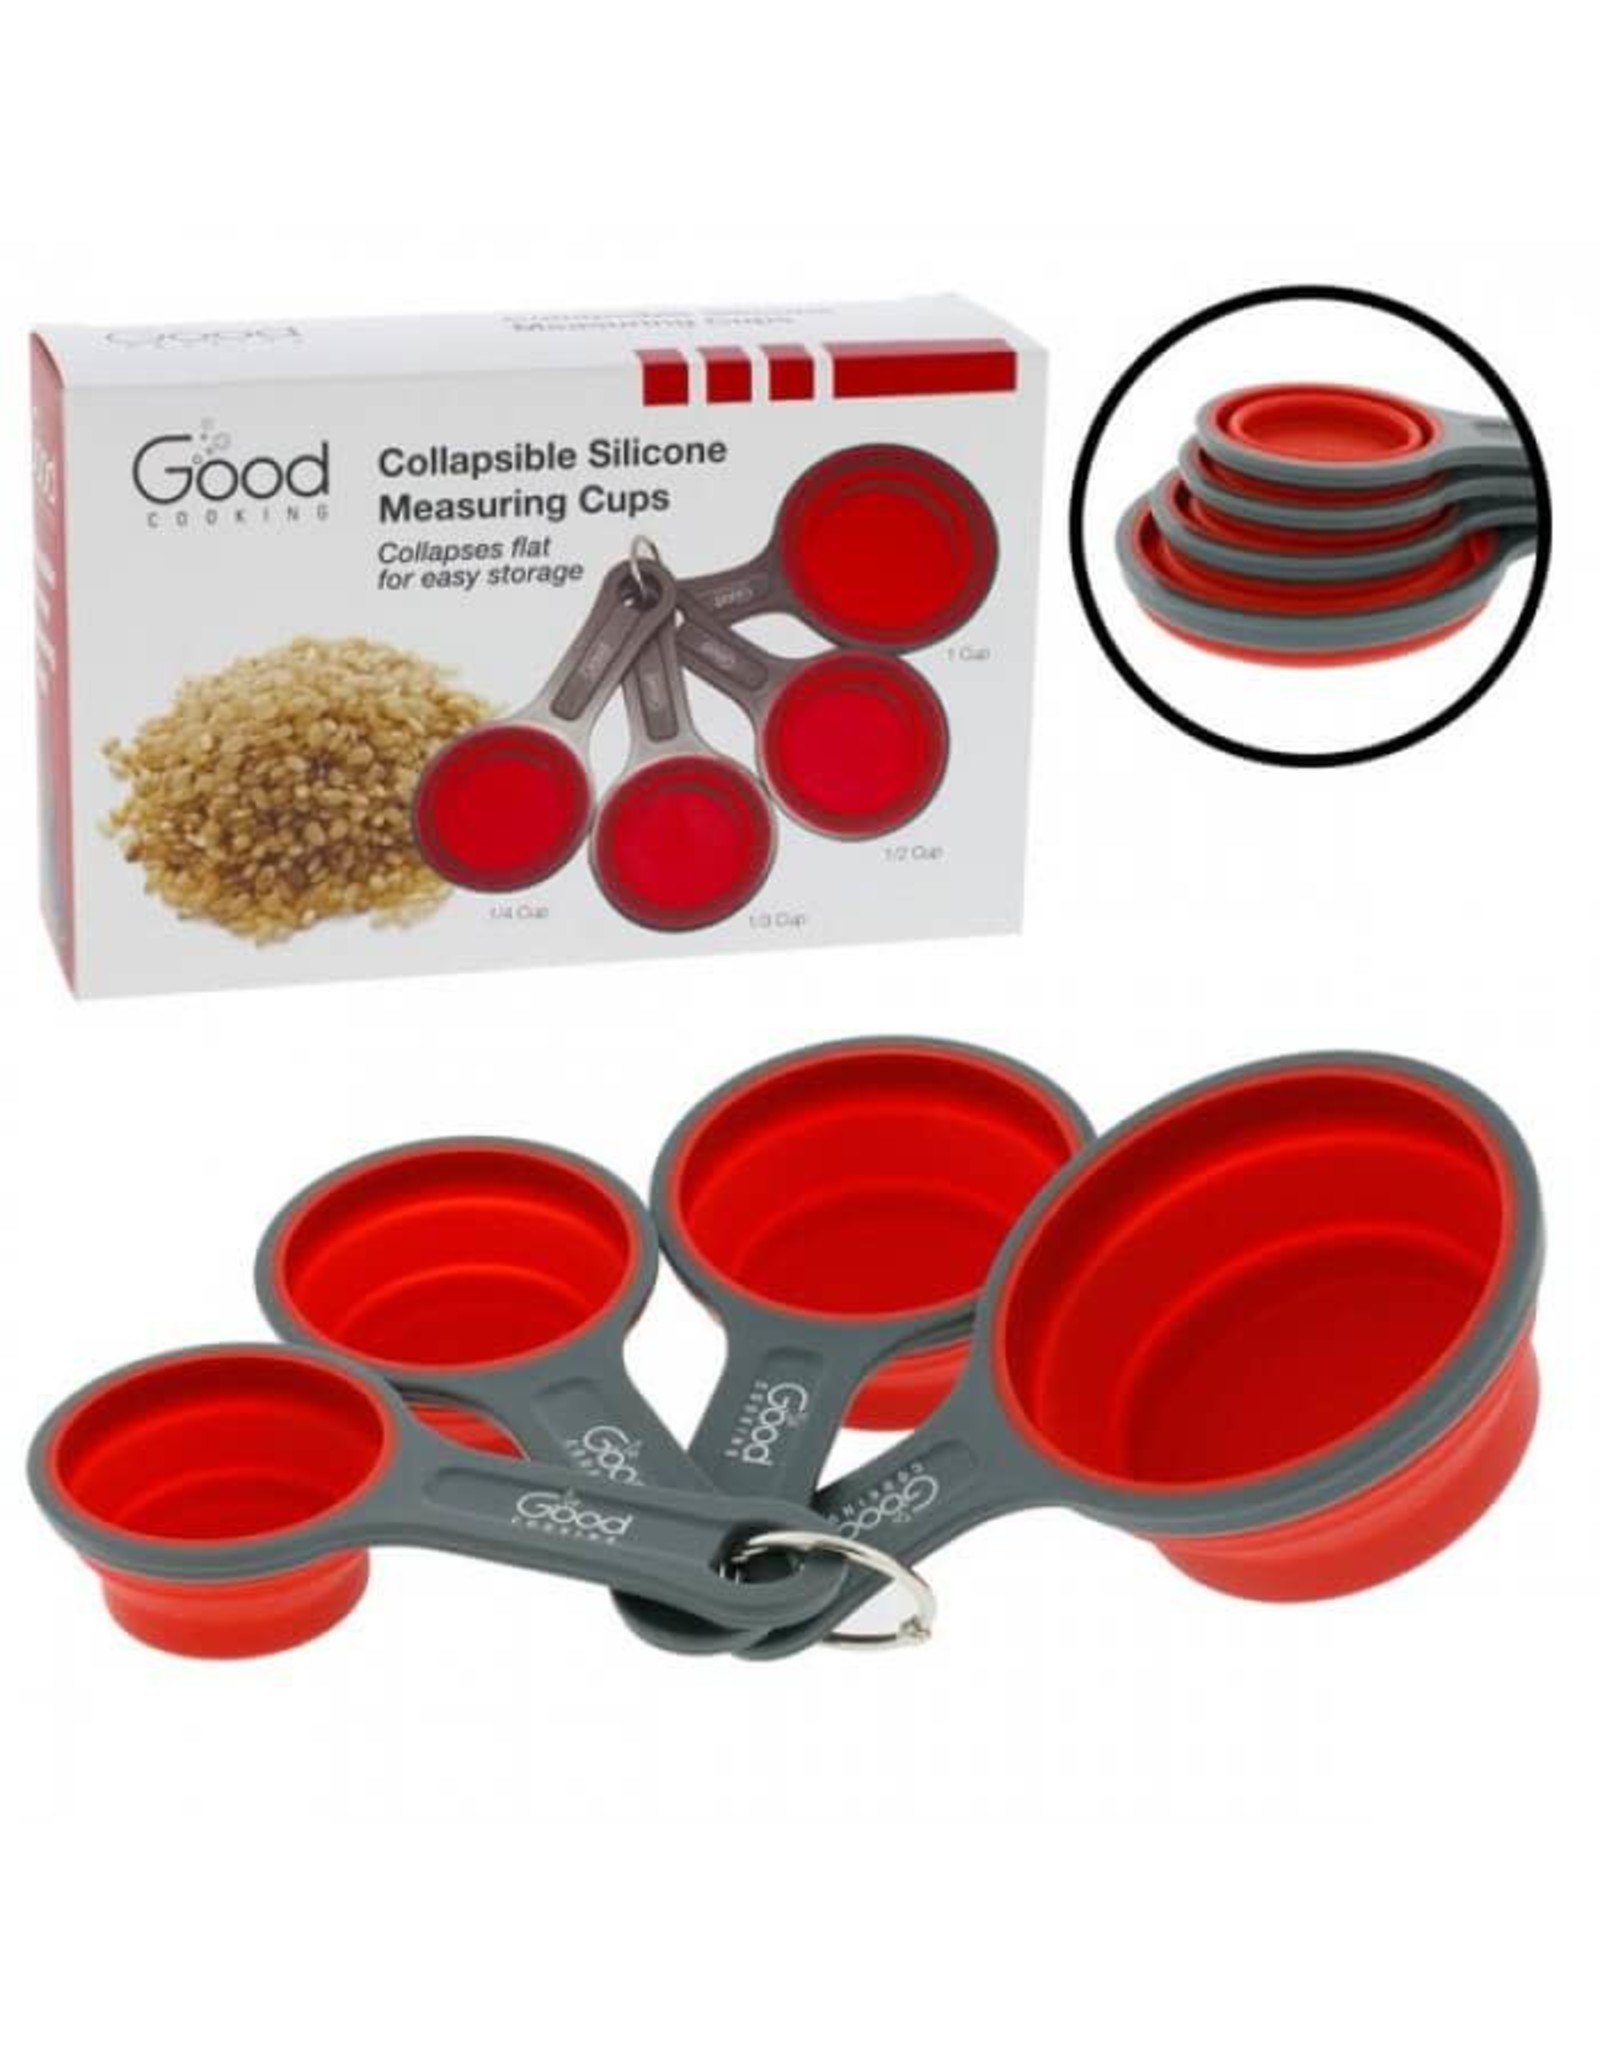 Collapsible Measuring Cups - Blanton-Caldwell